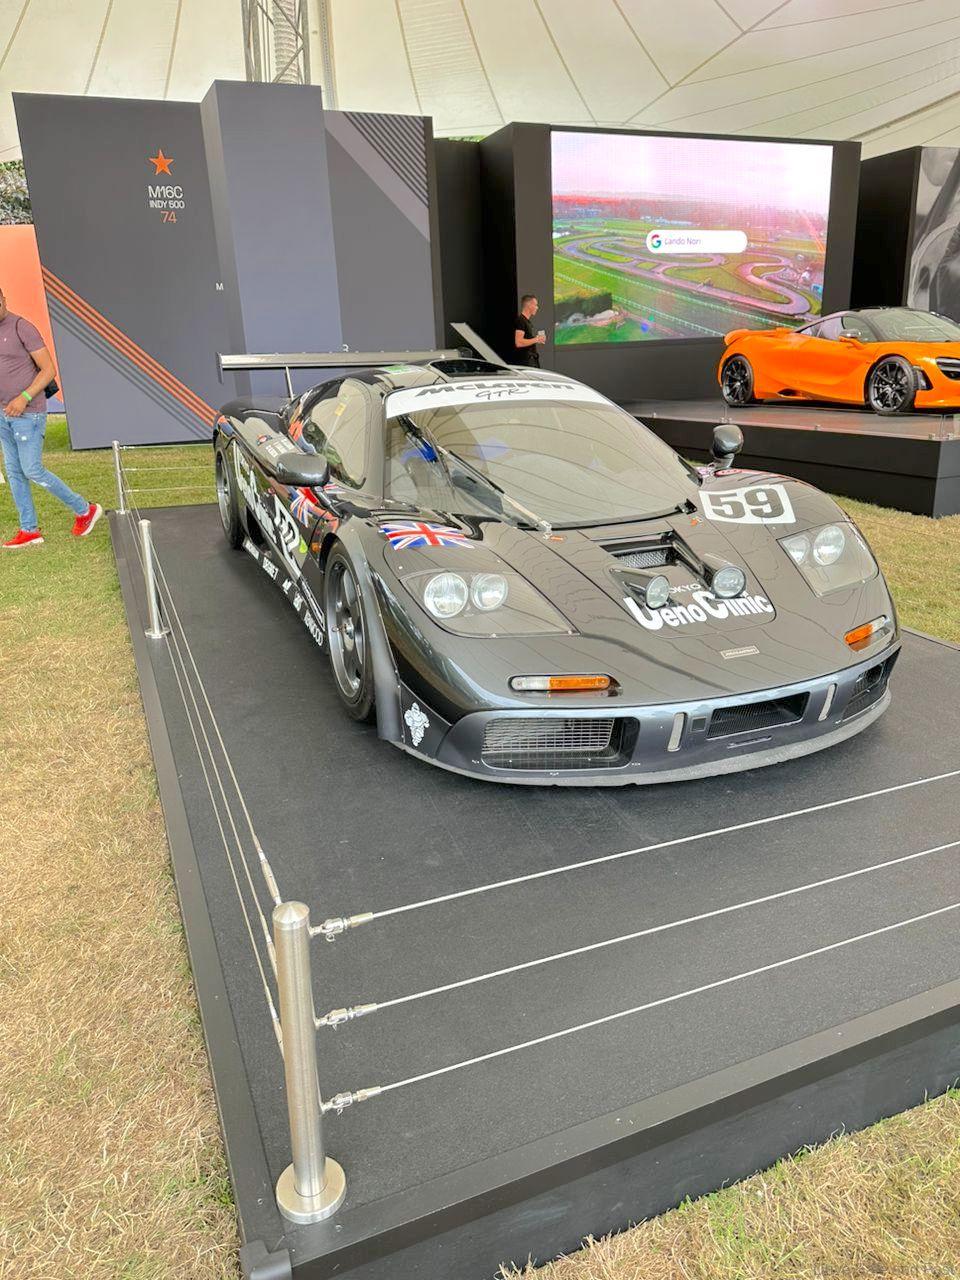 Goodwood Festival of Speed Future Cars And Super Cars Pics